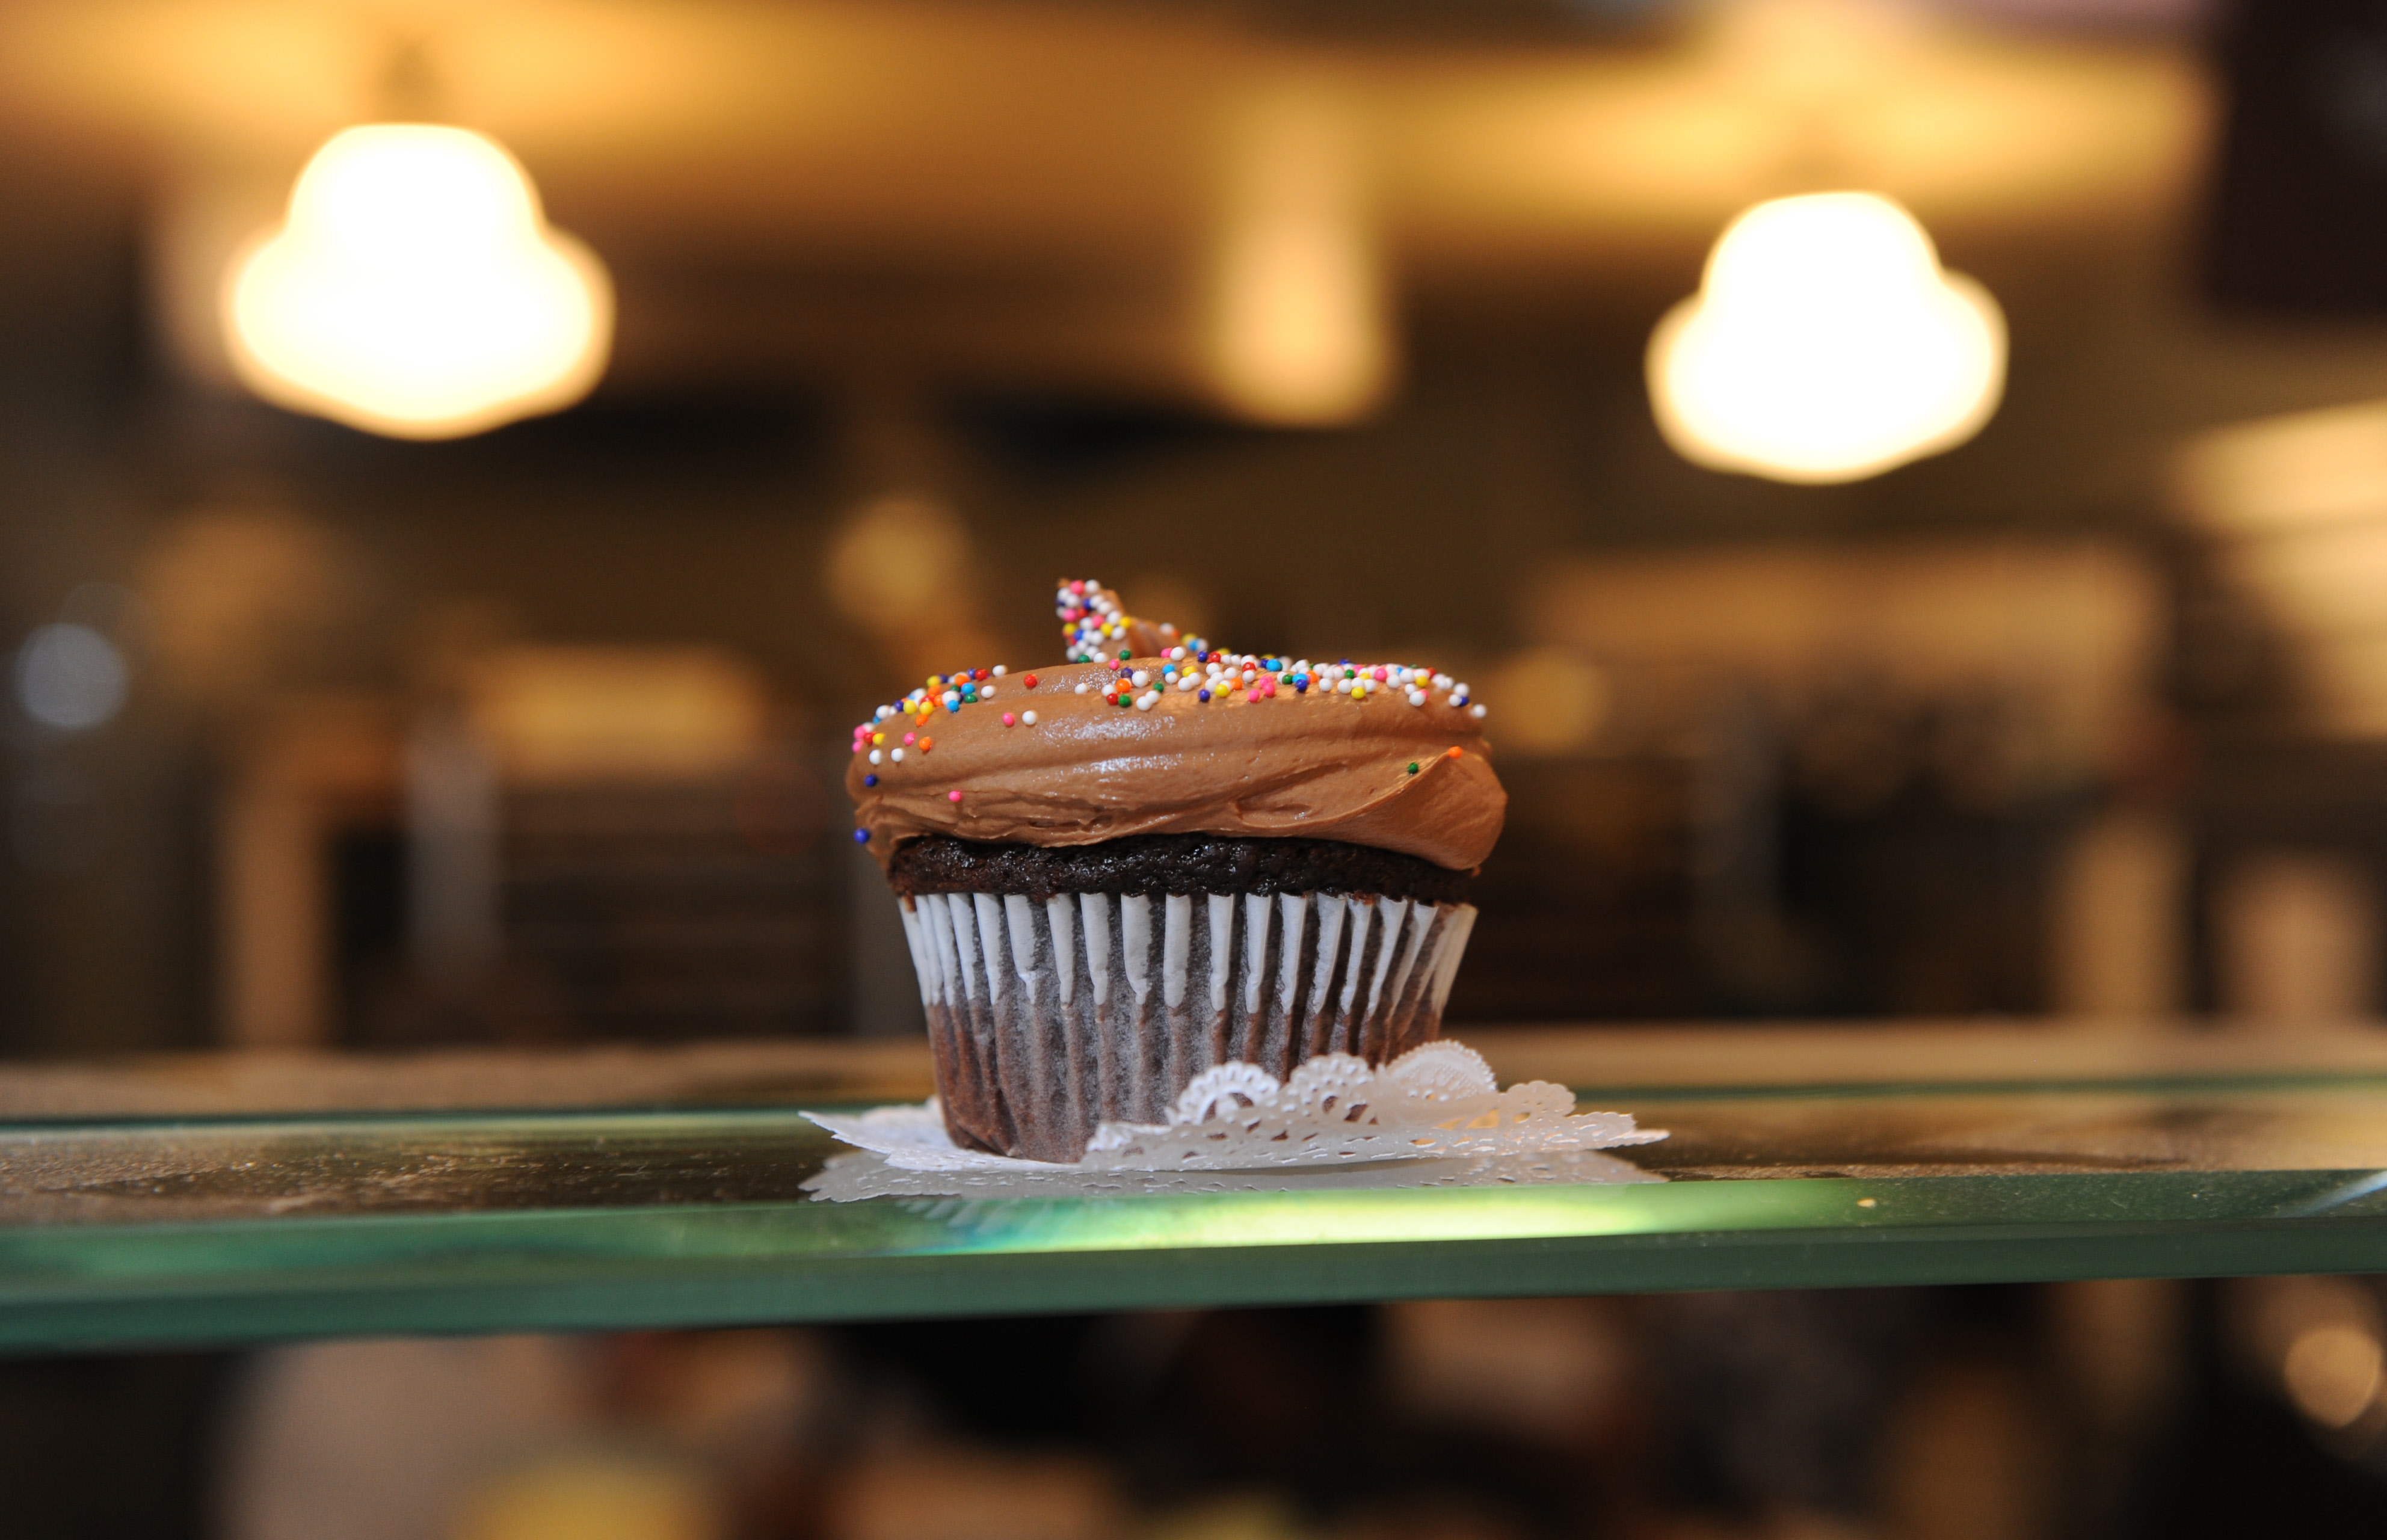 A cupcake on display at the Magnolia Bakery F